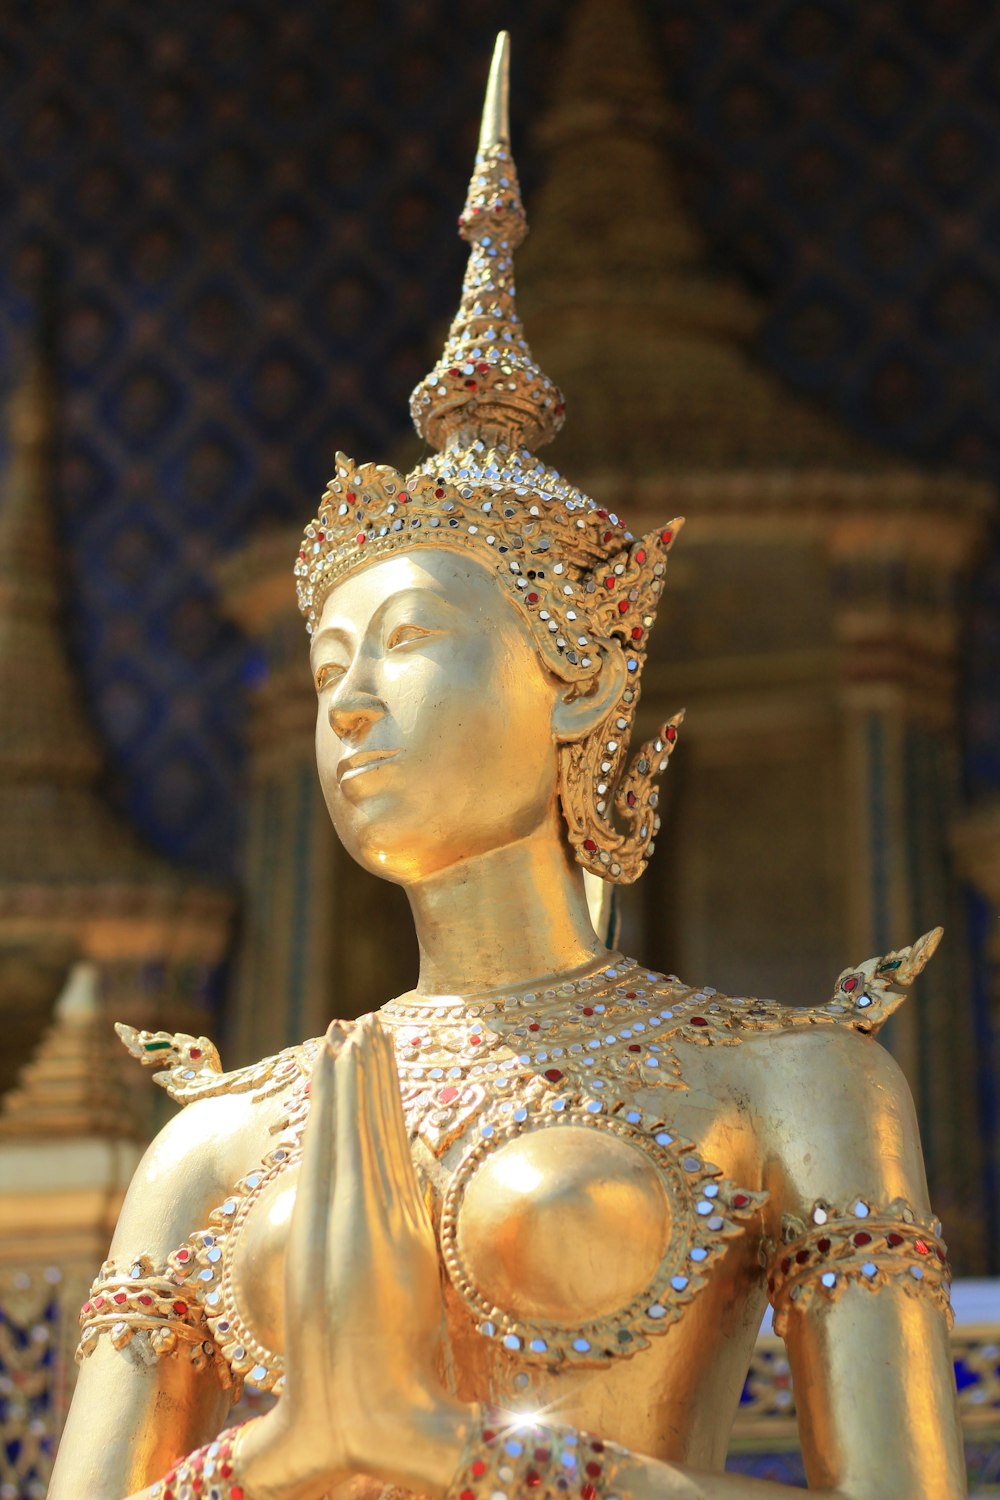 a golden statue of a woman with a crown on her head